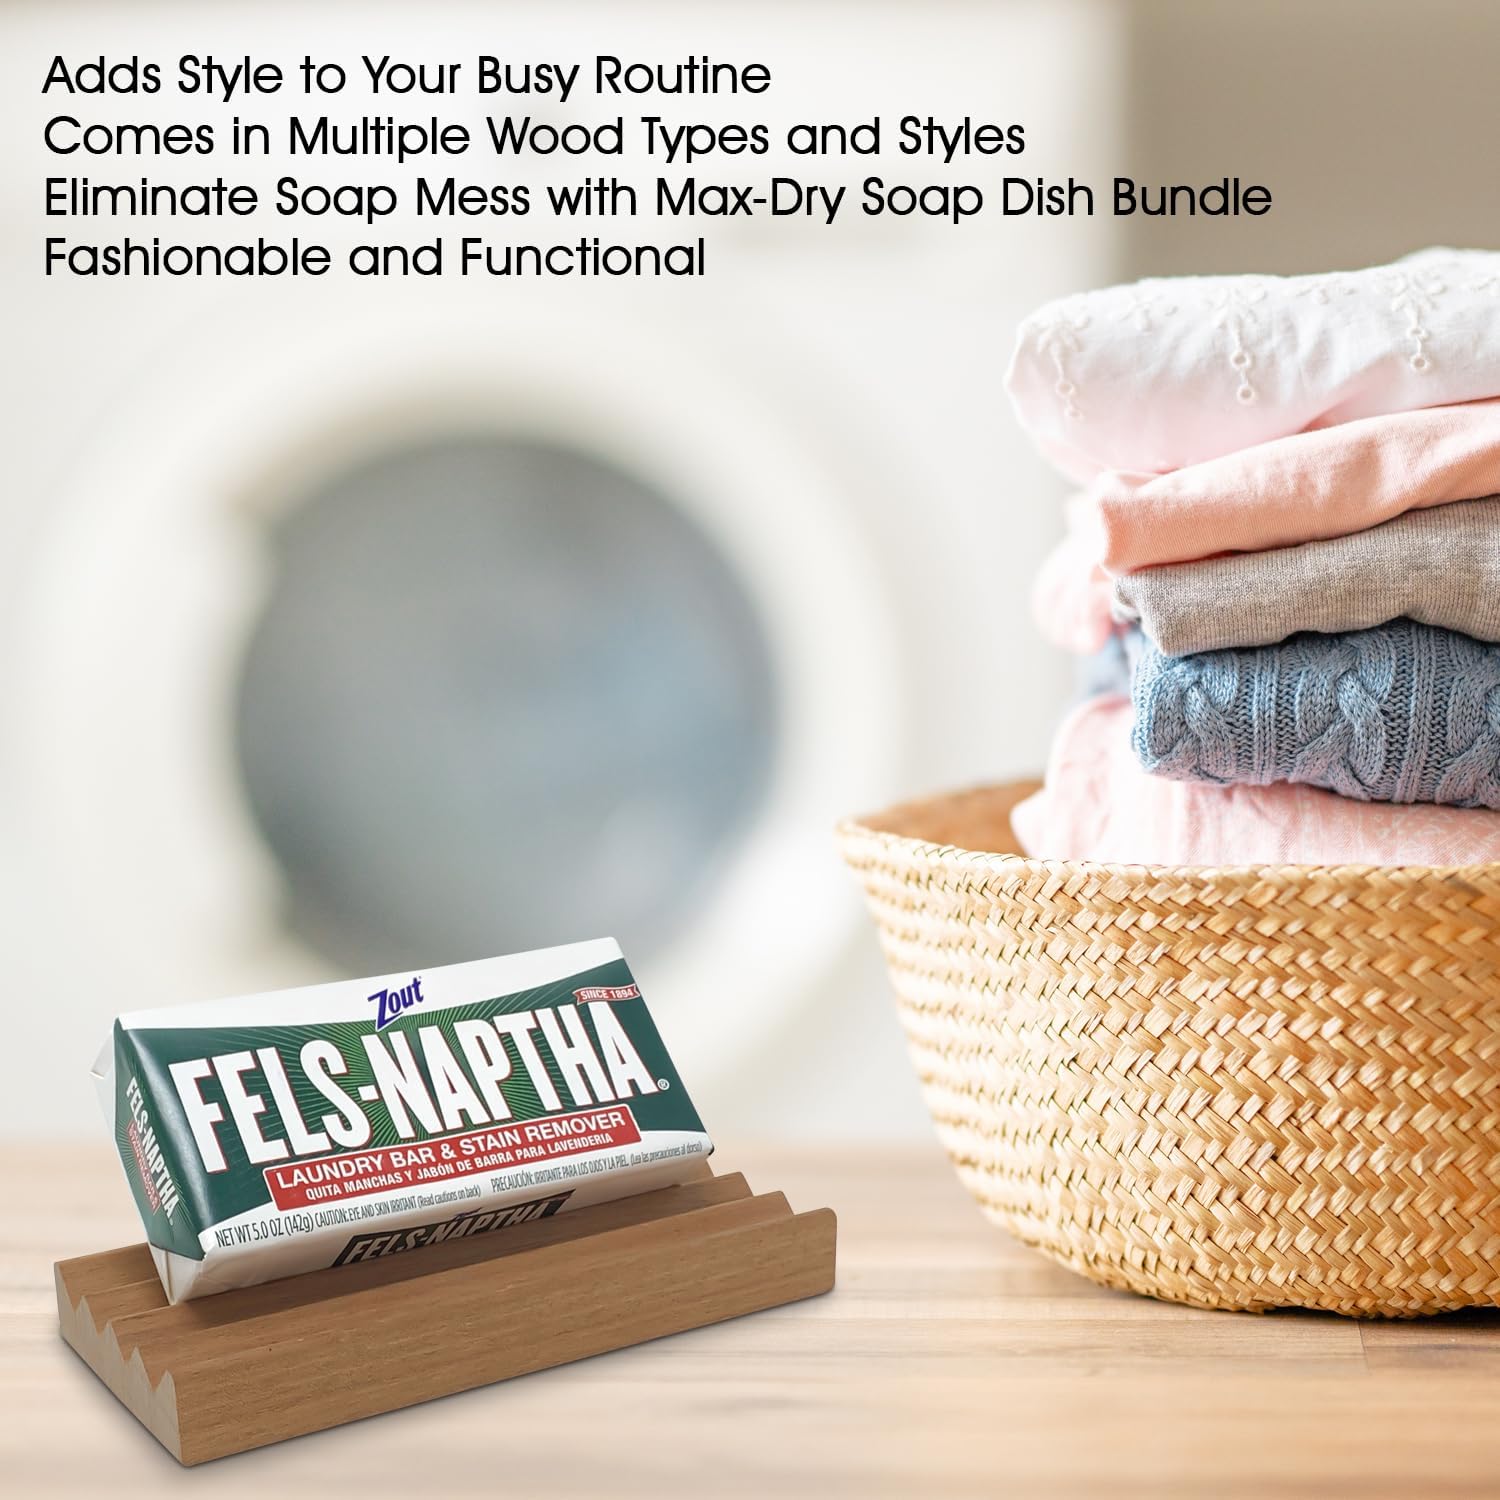 Fels Naptha Laundry Detergent Bar - 5 Ounce Fels Naptha Laundry Bar Soap and Stain Remover Bundle. (Redwood Style) Get the Ultimate Accessory to your Fels Naptha Soap Bars. : Health & Household